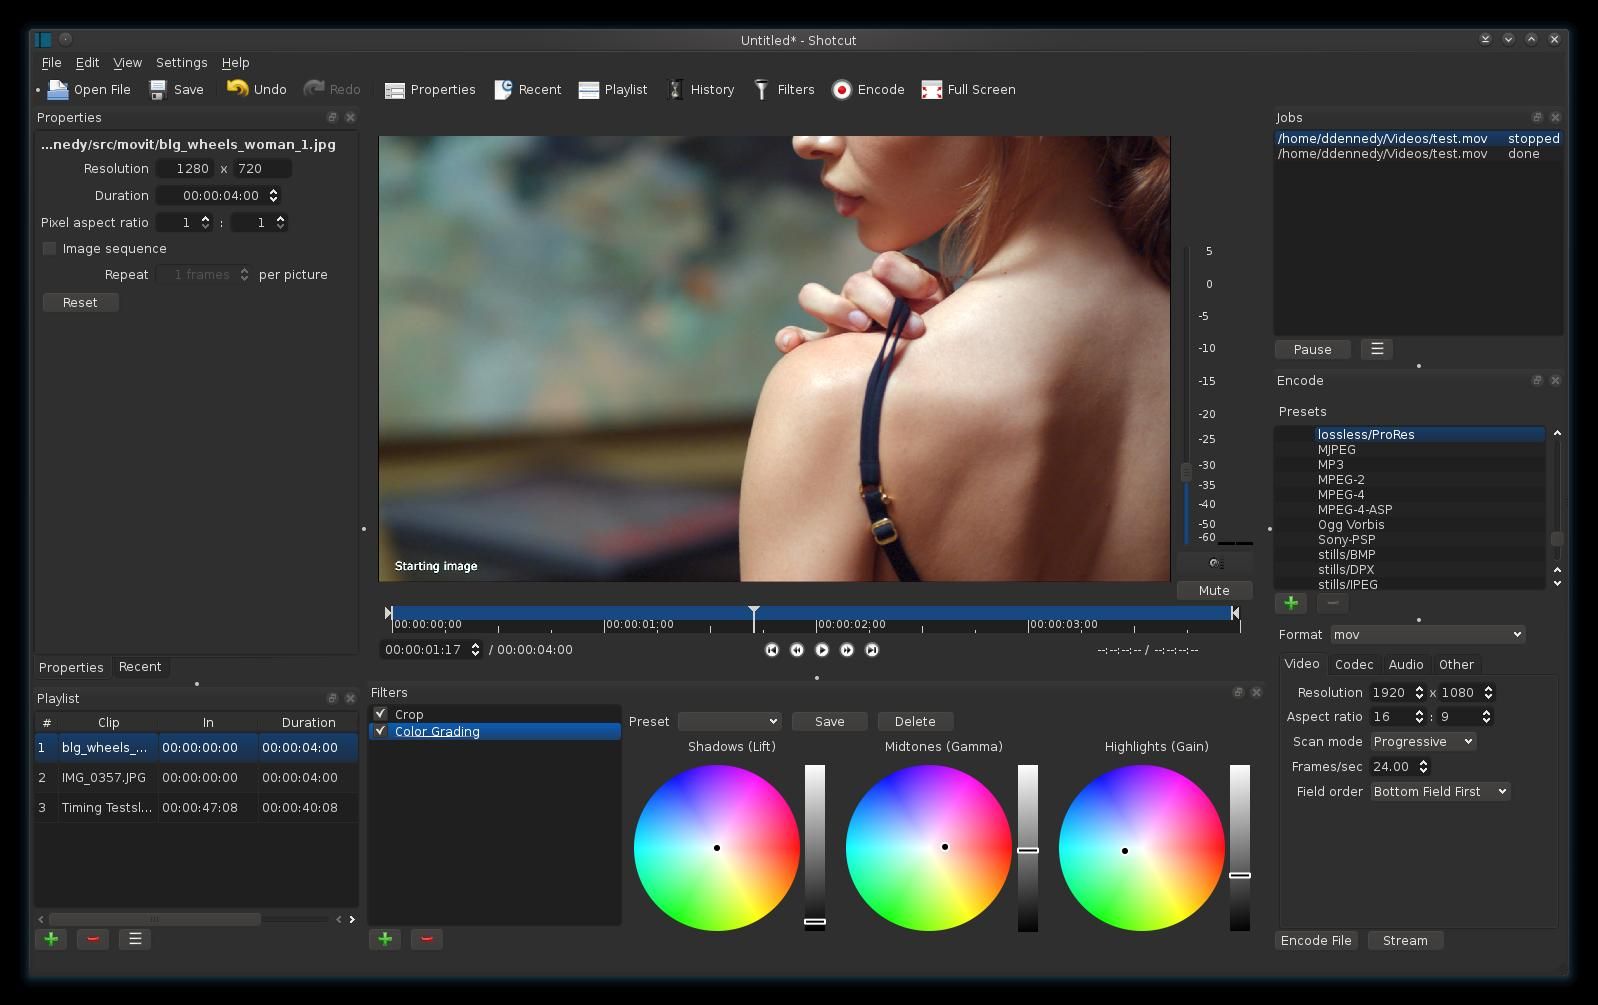 Looking for Movie Maker Alternative? Here are 5 Free Tools to Try